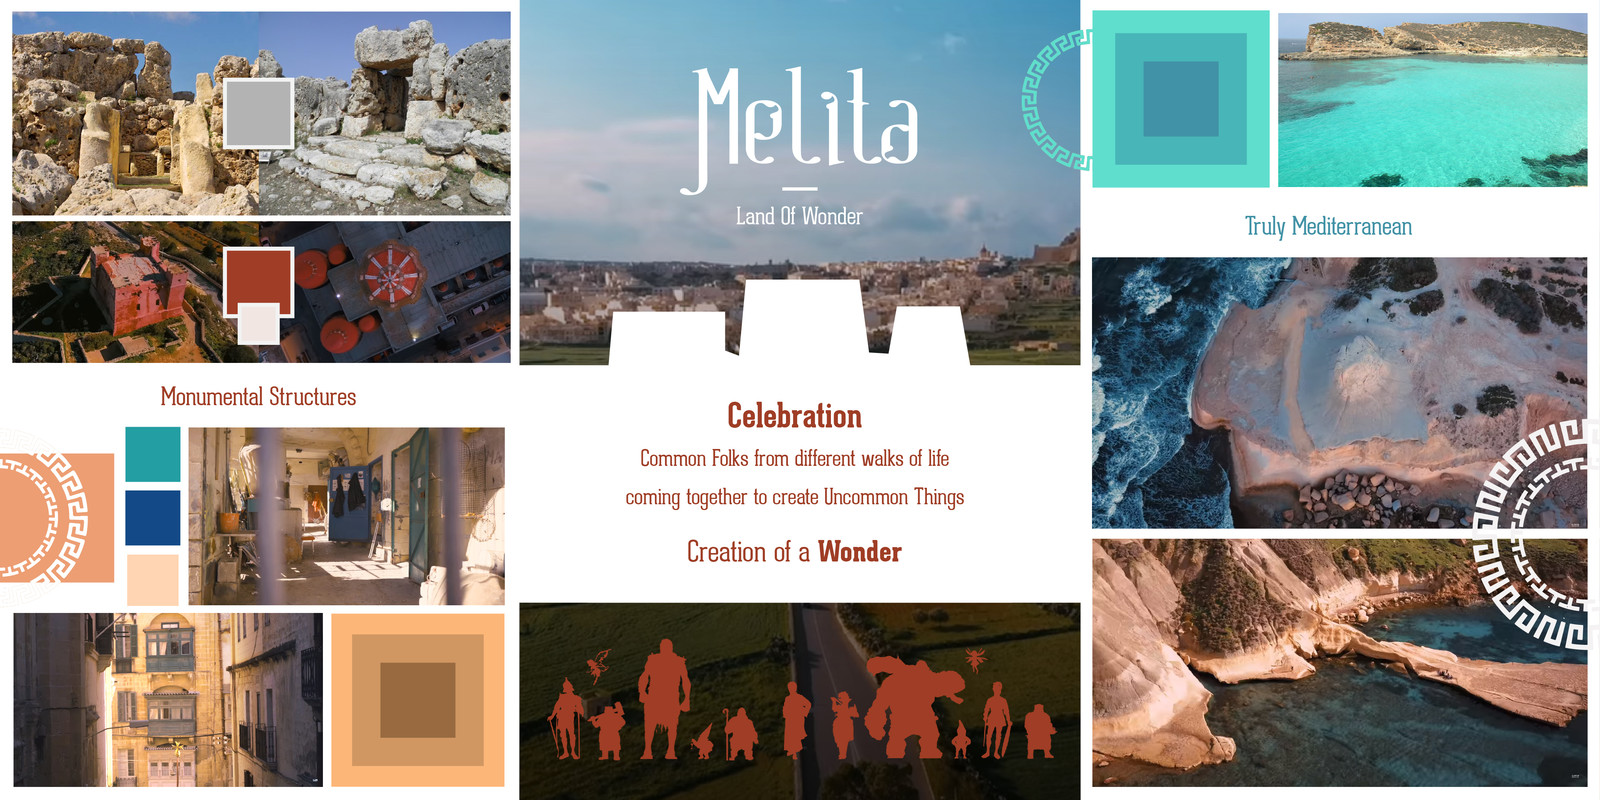 A Mood board created after some media consumption on Malta (Can't wait to visit it one day)